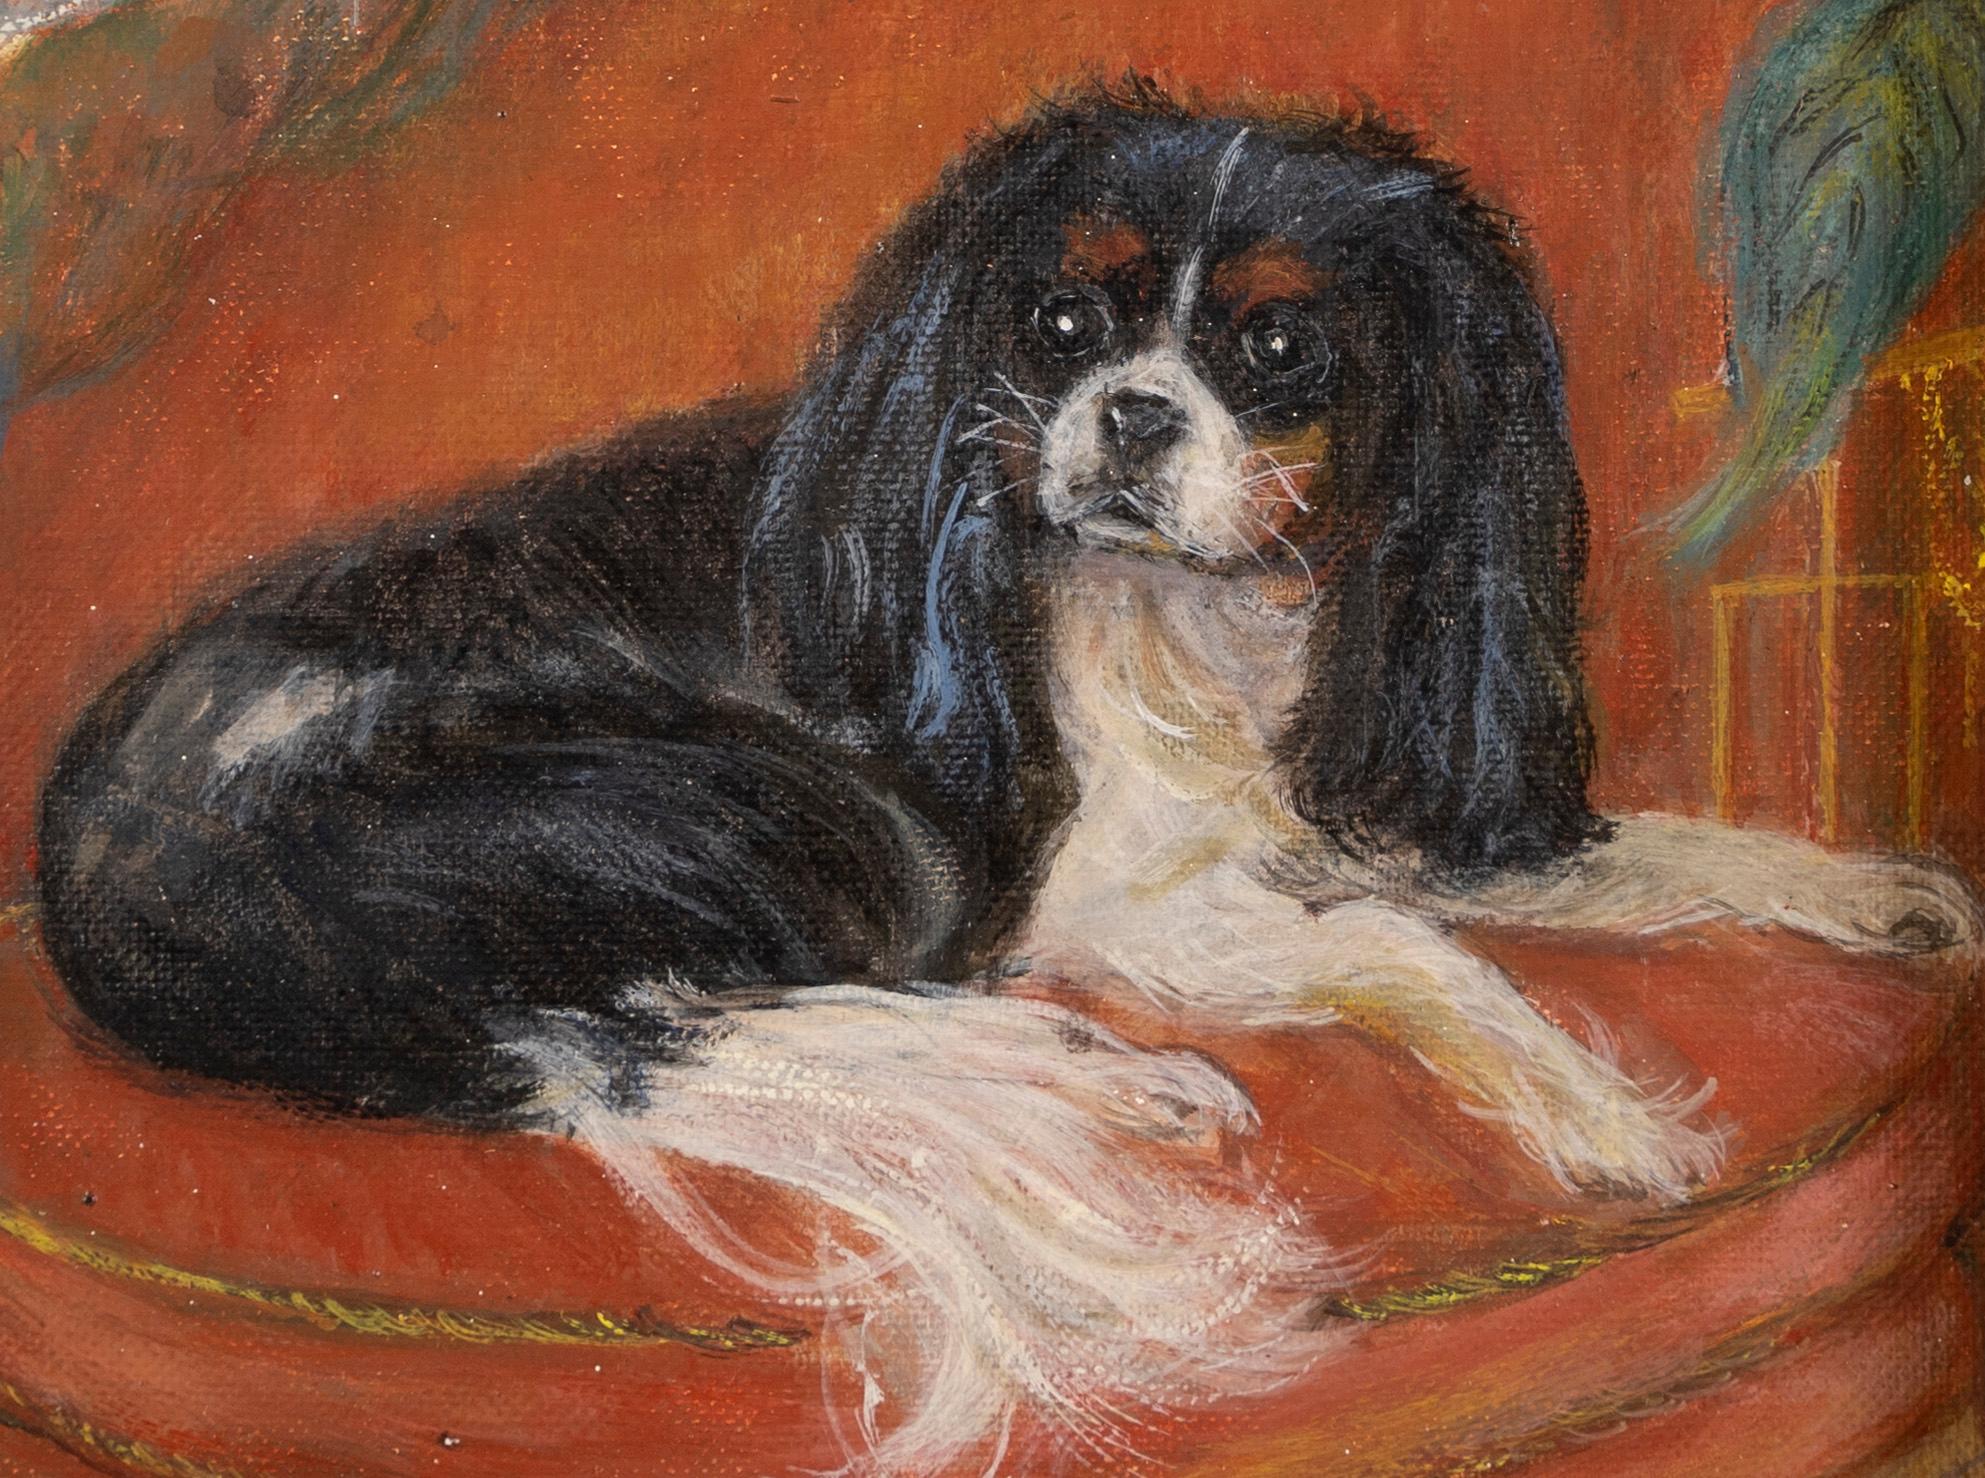 Antique American Impressionist King Charles Cavalier Spaniel Dog Parrot Painting - Brown Interior Painting by Unknown